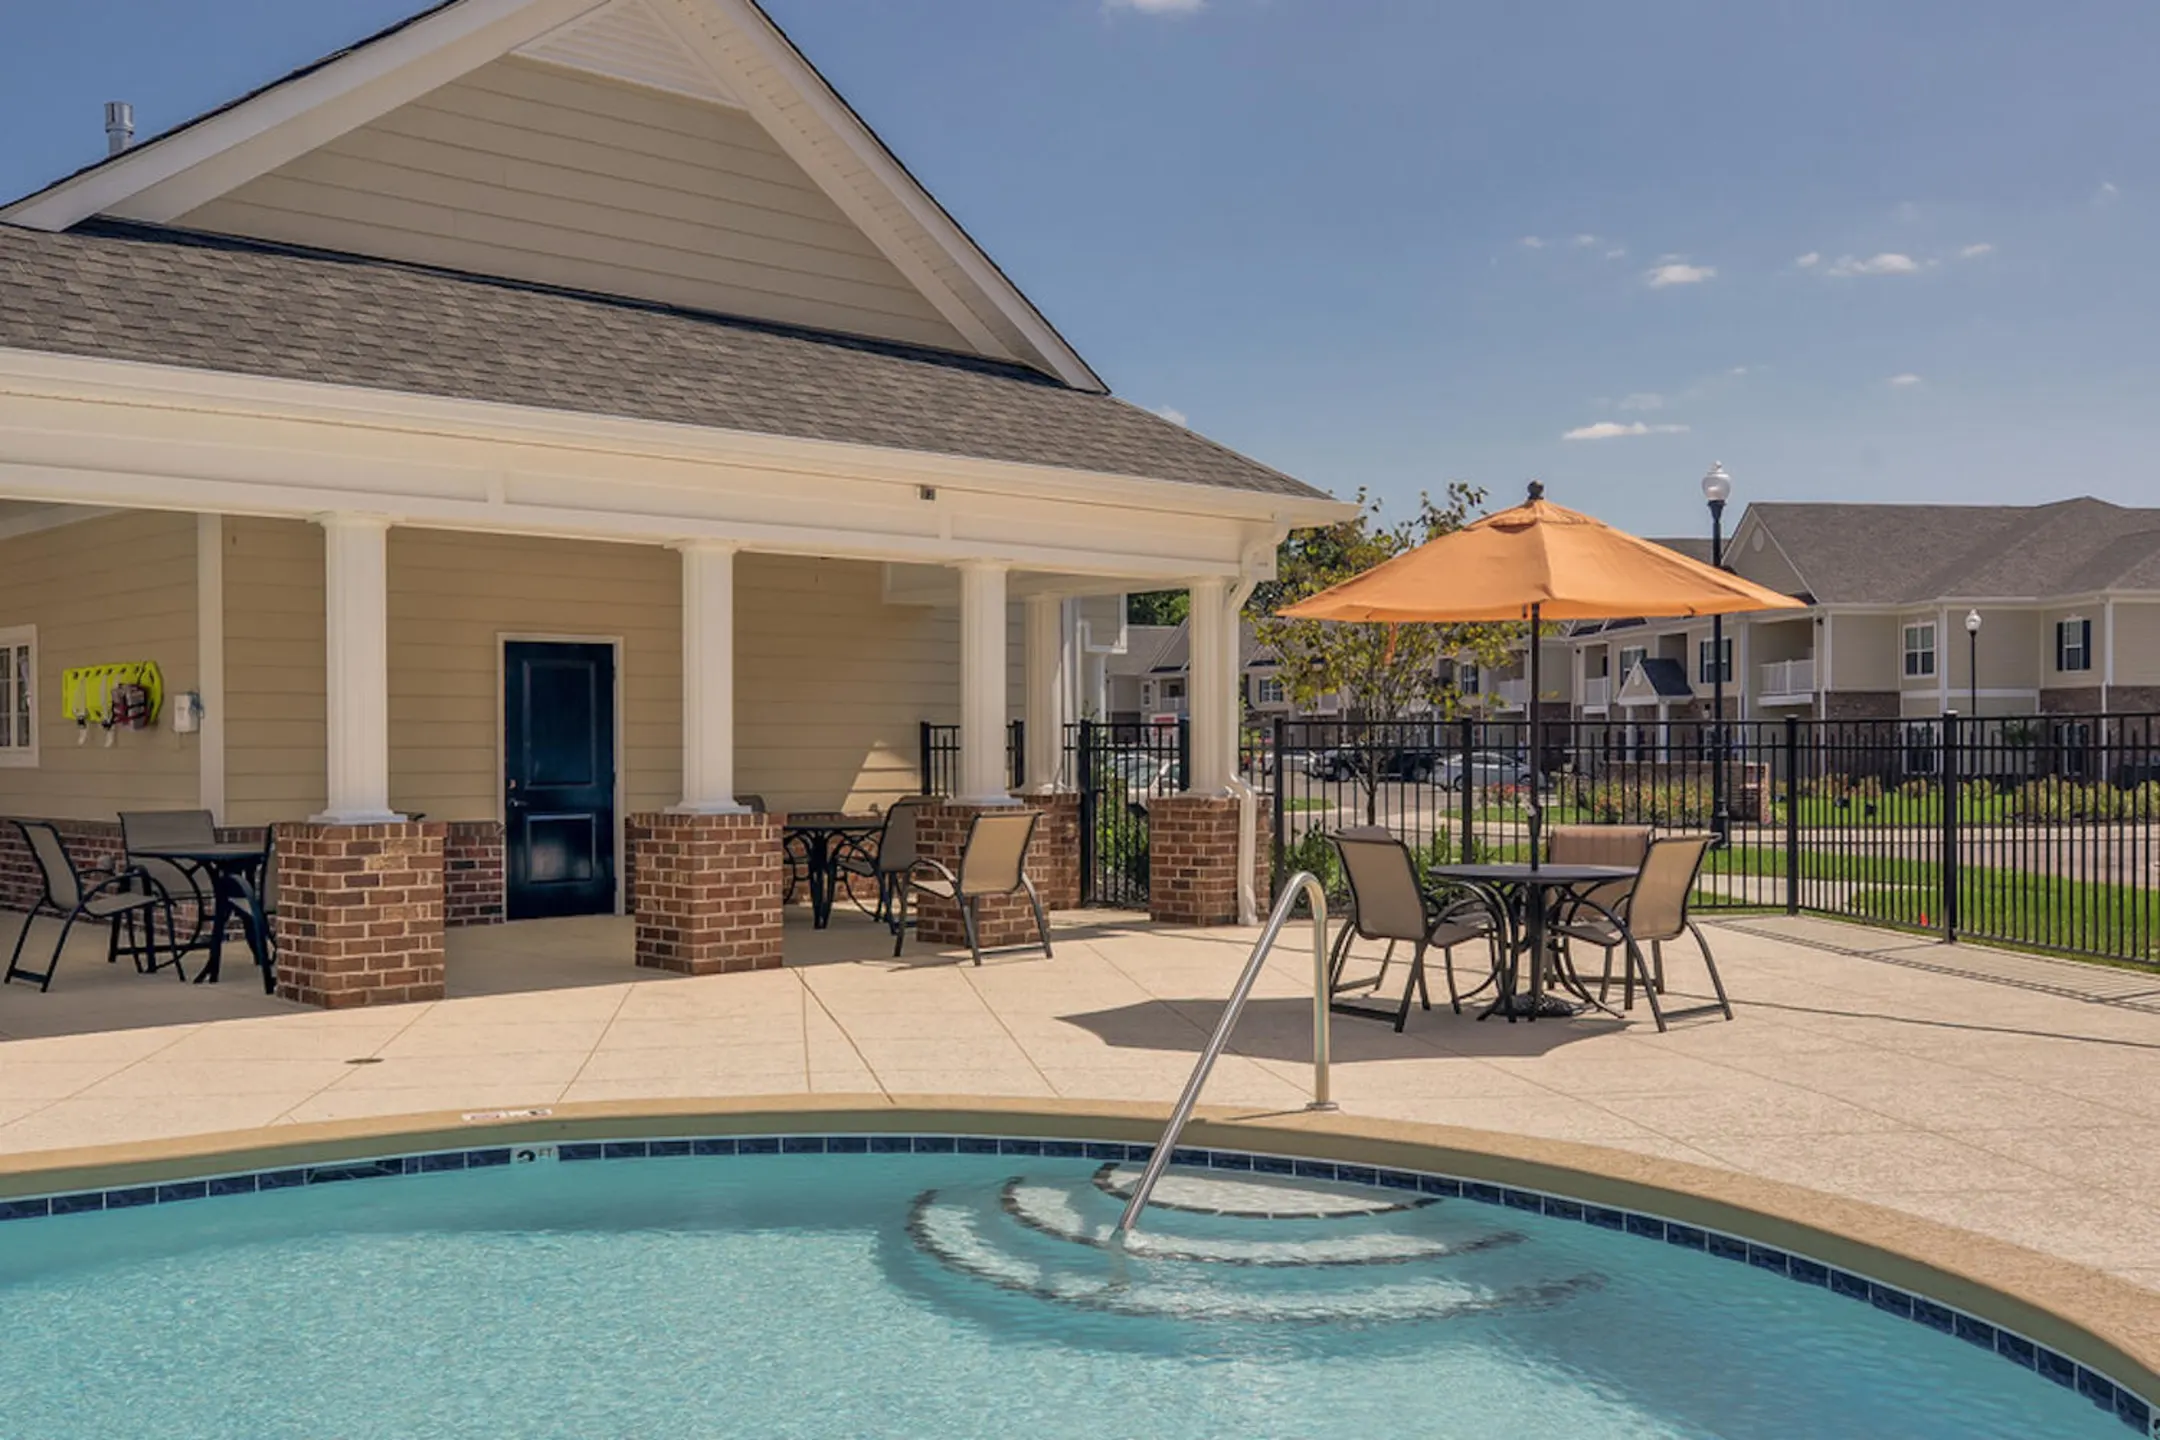 Pool - Cumberland Trace Village Apartments - Bowling Green, KY